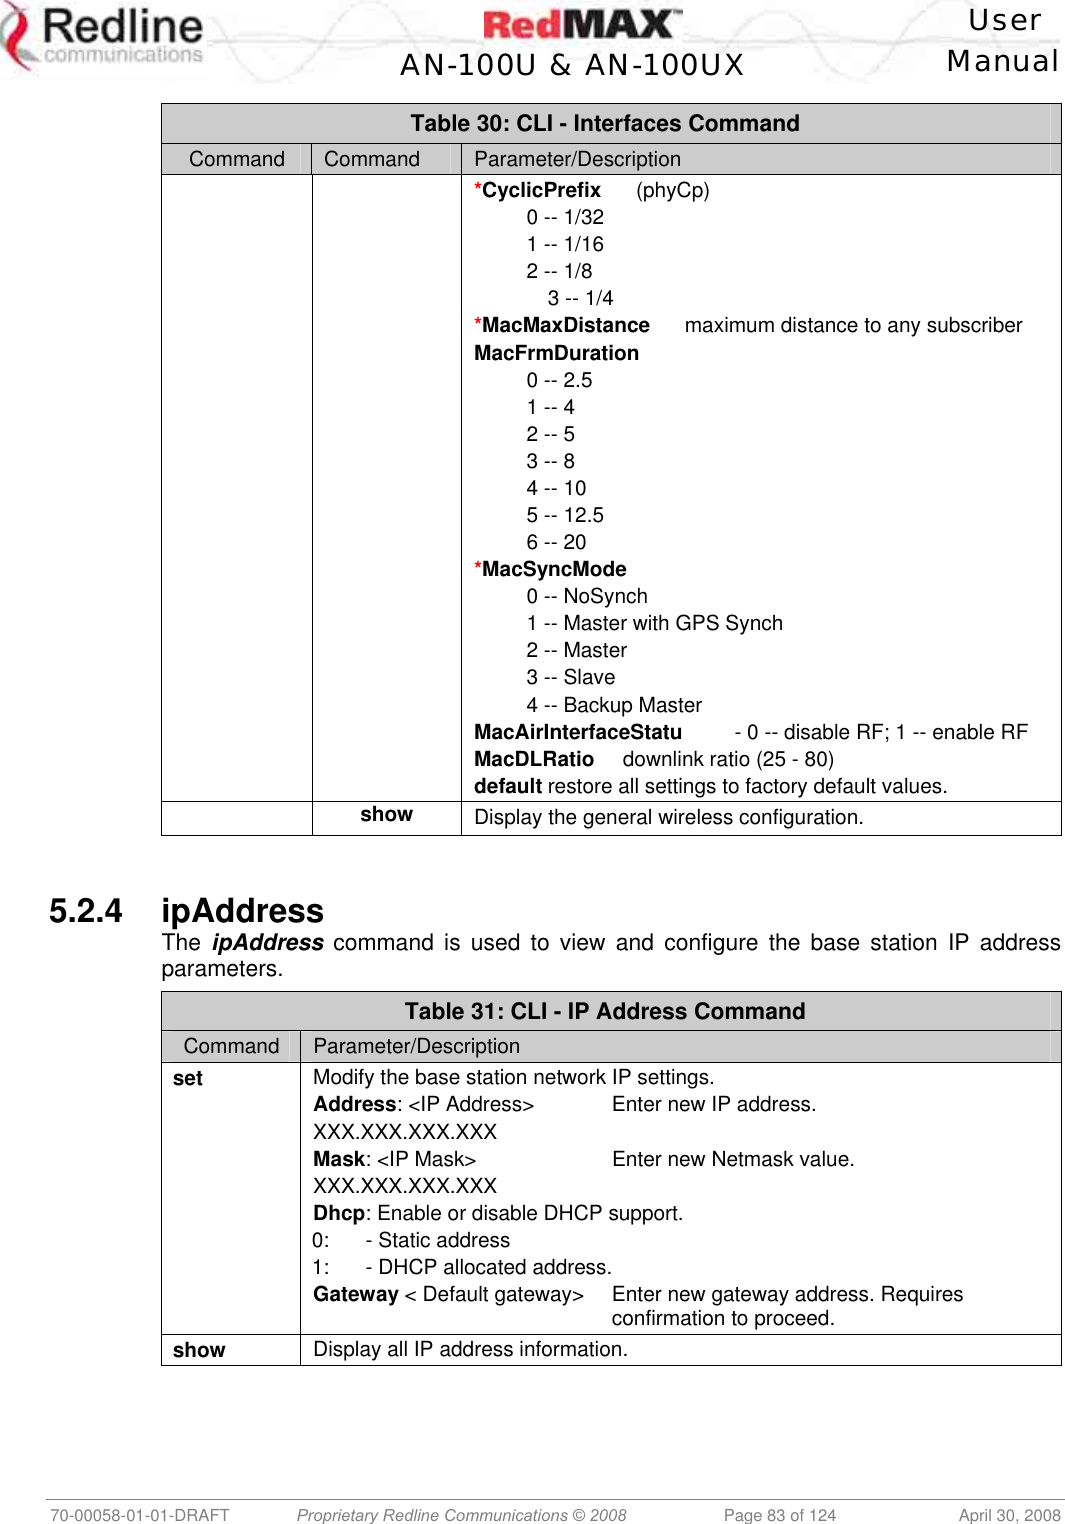    User  AN-100U &amp; AN-100UX Manual   70-00058-01-01-DRAFT  Proprietary Redline Communications © 2008   Page 83 of 124  April 30, 2008 Table 30: CLI - Interfaces Command Command  Command  Parameter/Description  *CyclicPrefix      (phyCp)   0 -- 1/32   1 -- 1/16   2 -- 1/8   3 -- 1/4 *MacMaxDistance      maximum distance to any subscriber MacFrmDuration   0 -- 2.5   1 -- 4   2 -- 5   3 -- 8   4 -- 10   5 -- 12.5   6 -- 20 *MacSyncMode   0 -- NoSynch   1 -- Master with GPS Synch   2 -- Master   3 -- Slave   4 -- Backup Master MacAirInterfaceStatu         - 0 -- disable RF; 1 -- enable RF MacDLRatio  downlink ratio (25 - 80) default restore all settings to factory default values.  show  Display the general wireless configuration.    5.2.4 ipAddress The  ipAddress command is used to view and configure the base station IP address parameters. Table 31: CLI - IP Address Command Command  Parameter/Description set  Modify the base station network IP settings. Address: &lt;IP Address&gt;   Enter new IP address. XXX.XXX.XXX.XXX Mask: &lt;IP Mask&gt;    Enter new Netmask value. XXX.XXX.XXX.XXX Dhcp: Enable or disable DHCP support. 0:  - Static address 1:  - DHCP allocated address. Gateway &lt; Default gateway&gt;  Enter new gateway address. Requires     confirmation to proceed. show  Display all IP address information.  